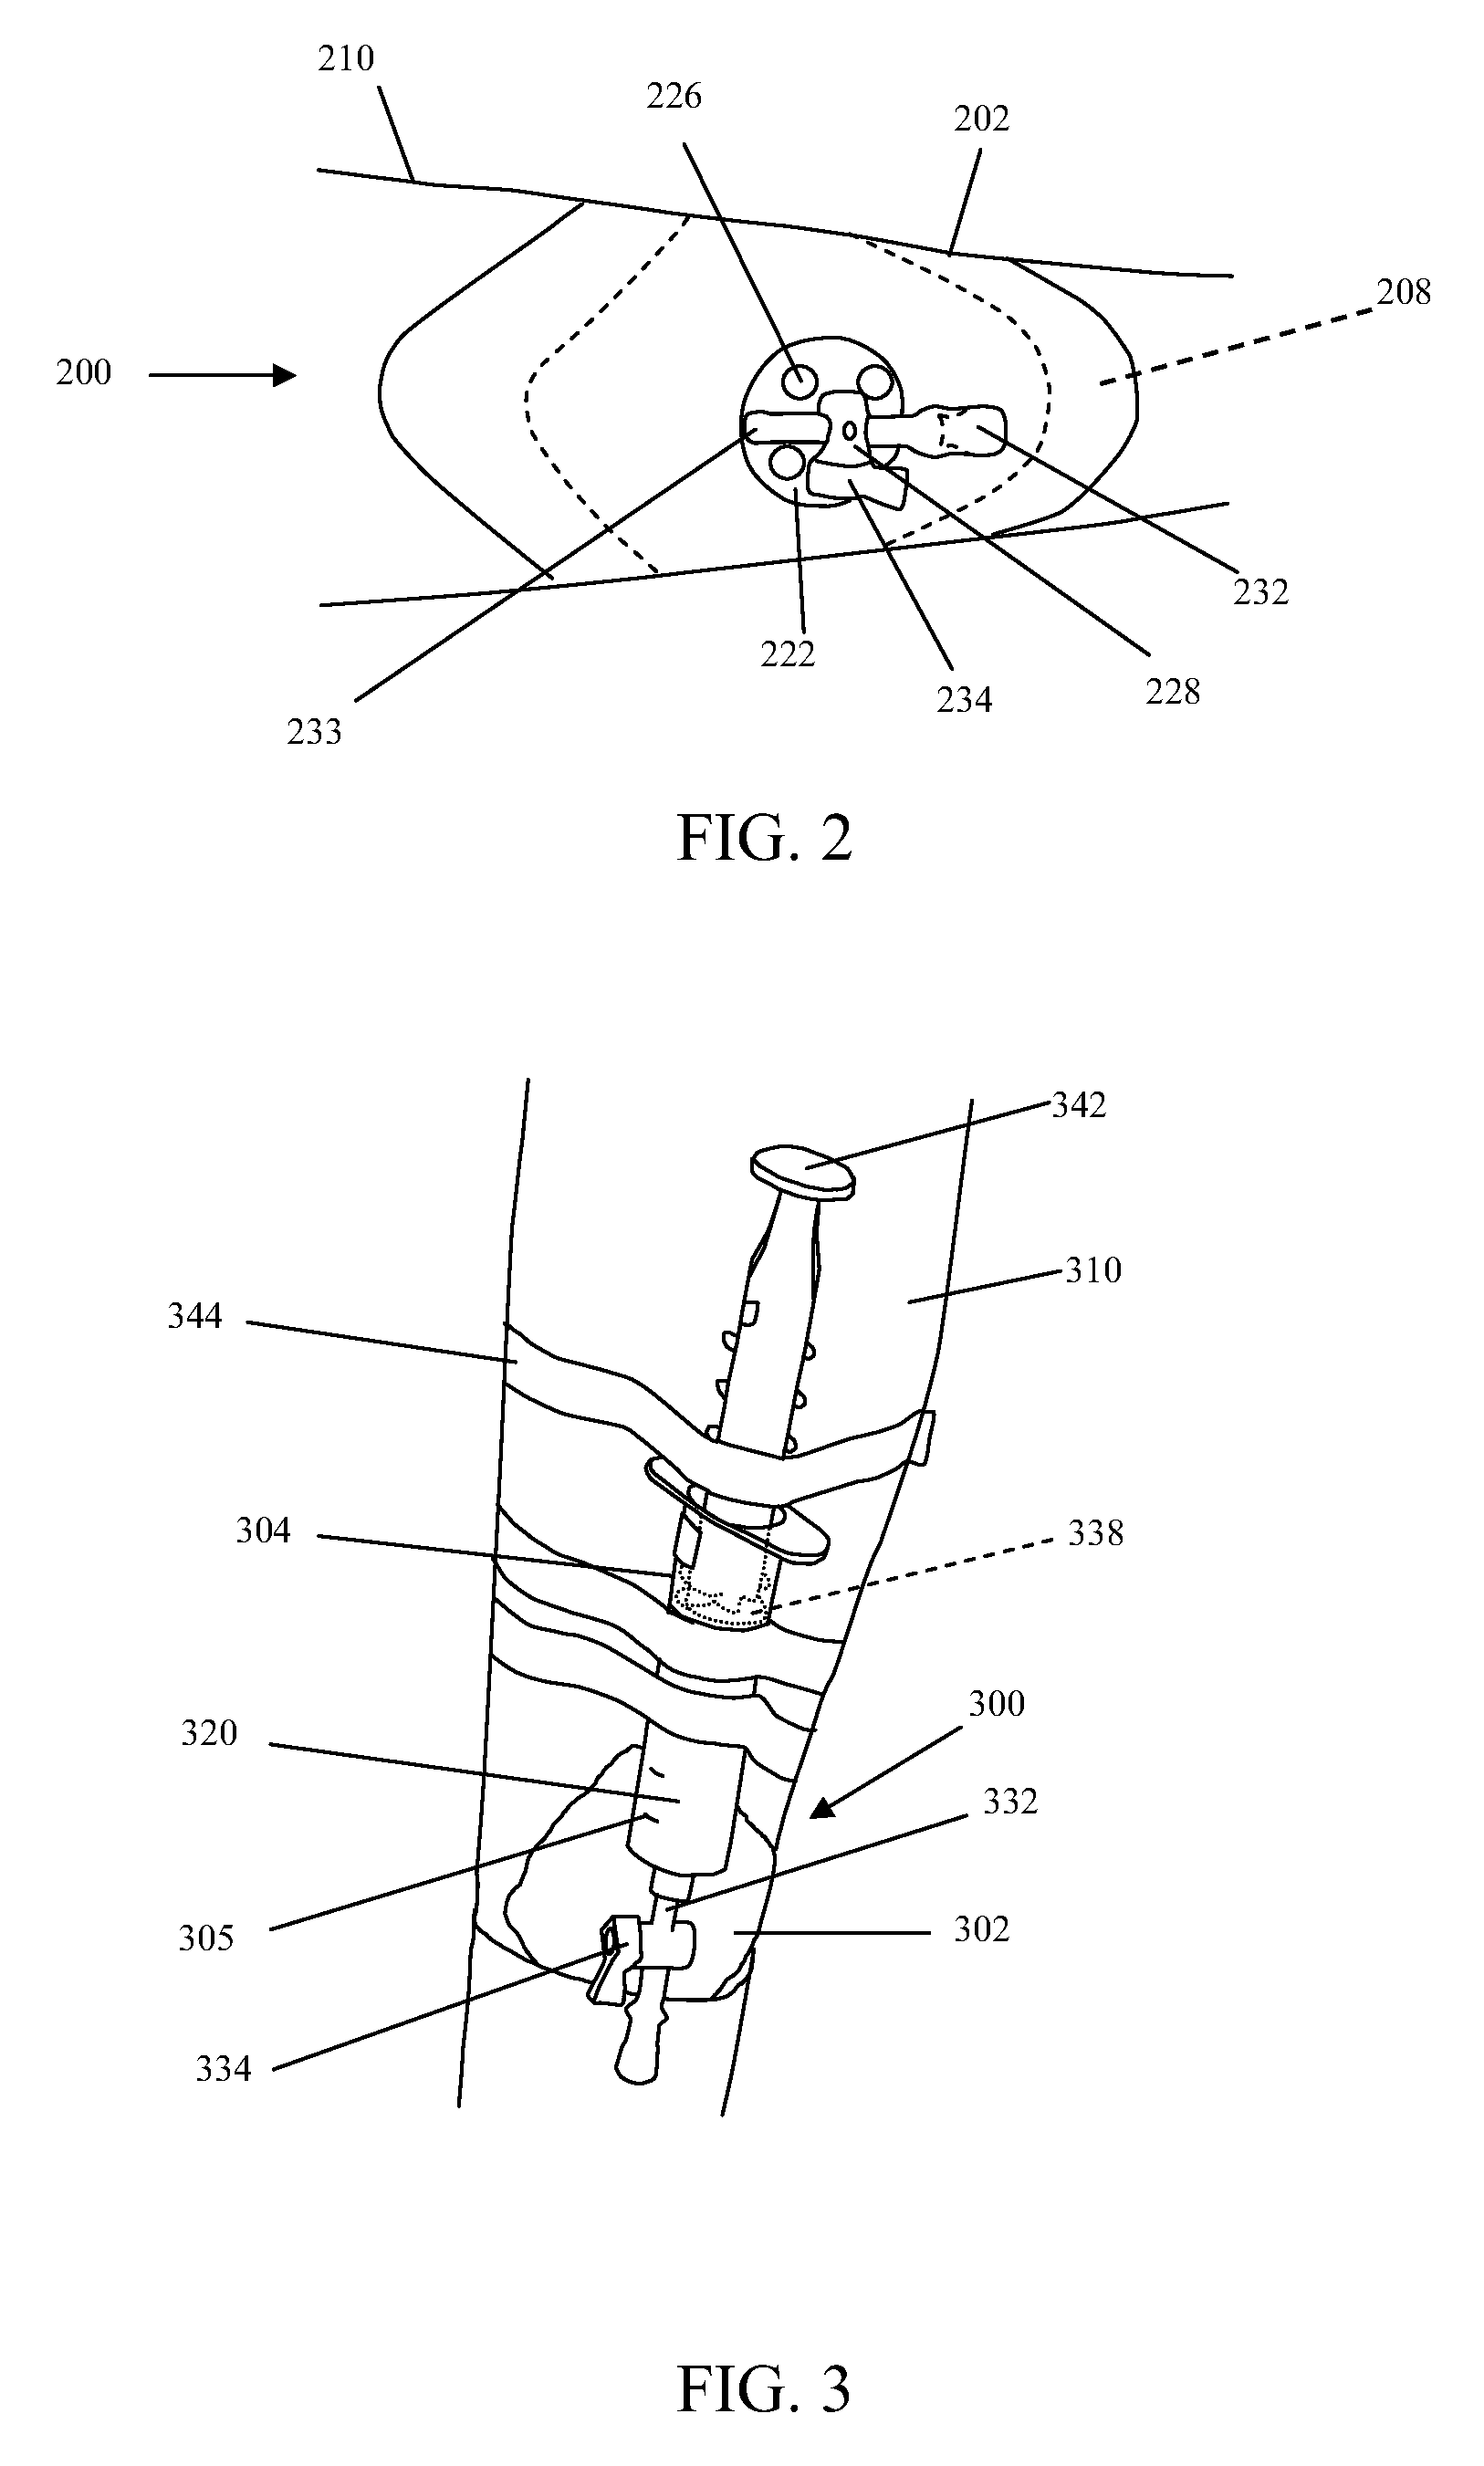 Methods for application of reduced pressure therapy